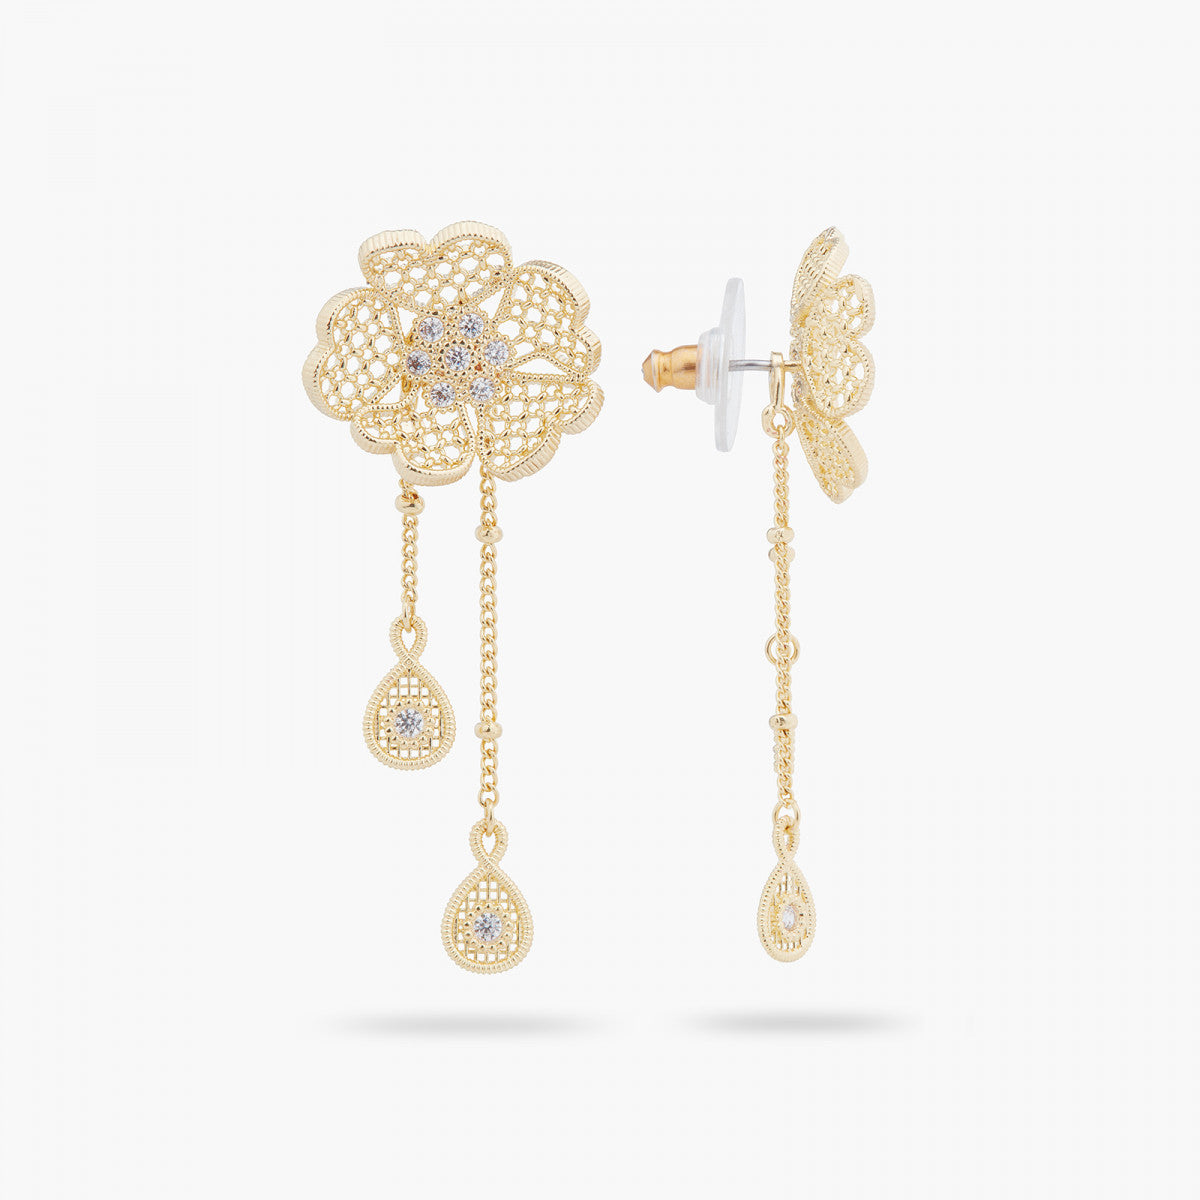 GOLD THREAD TWO-IN-ONE POST EARRINGS